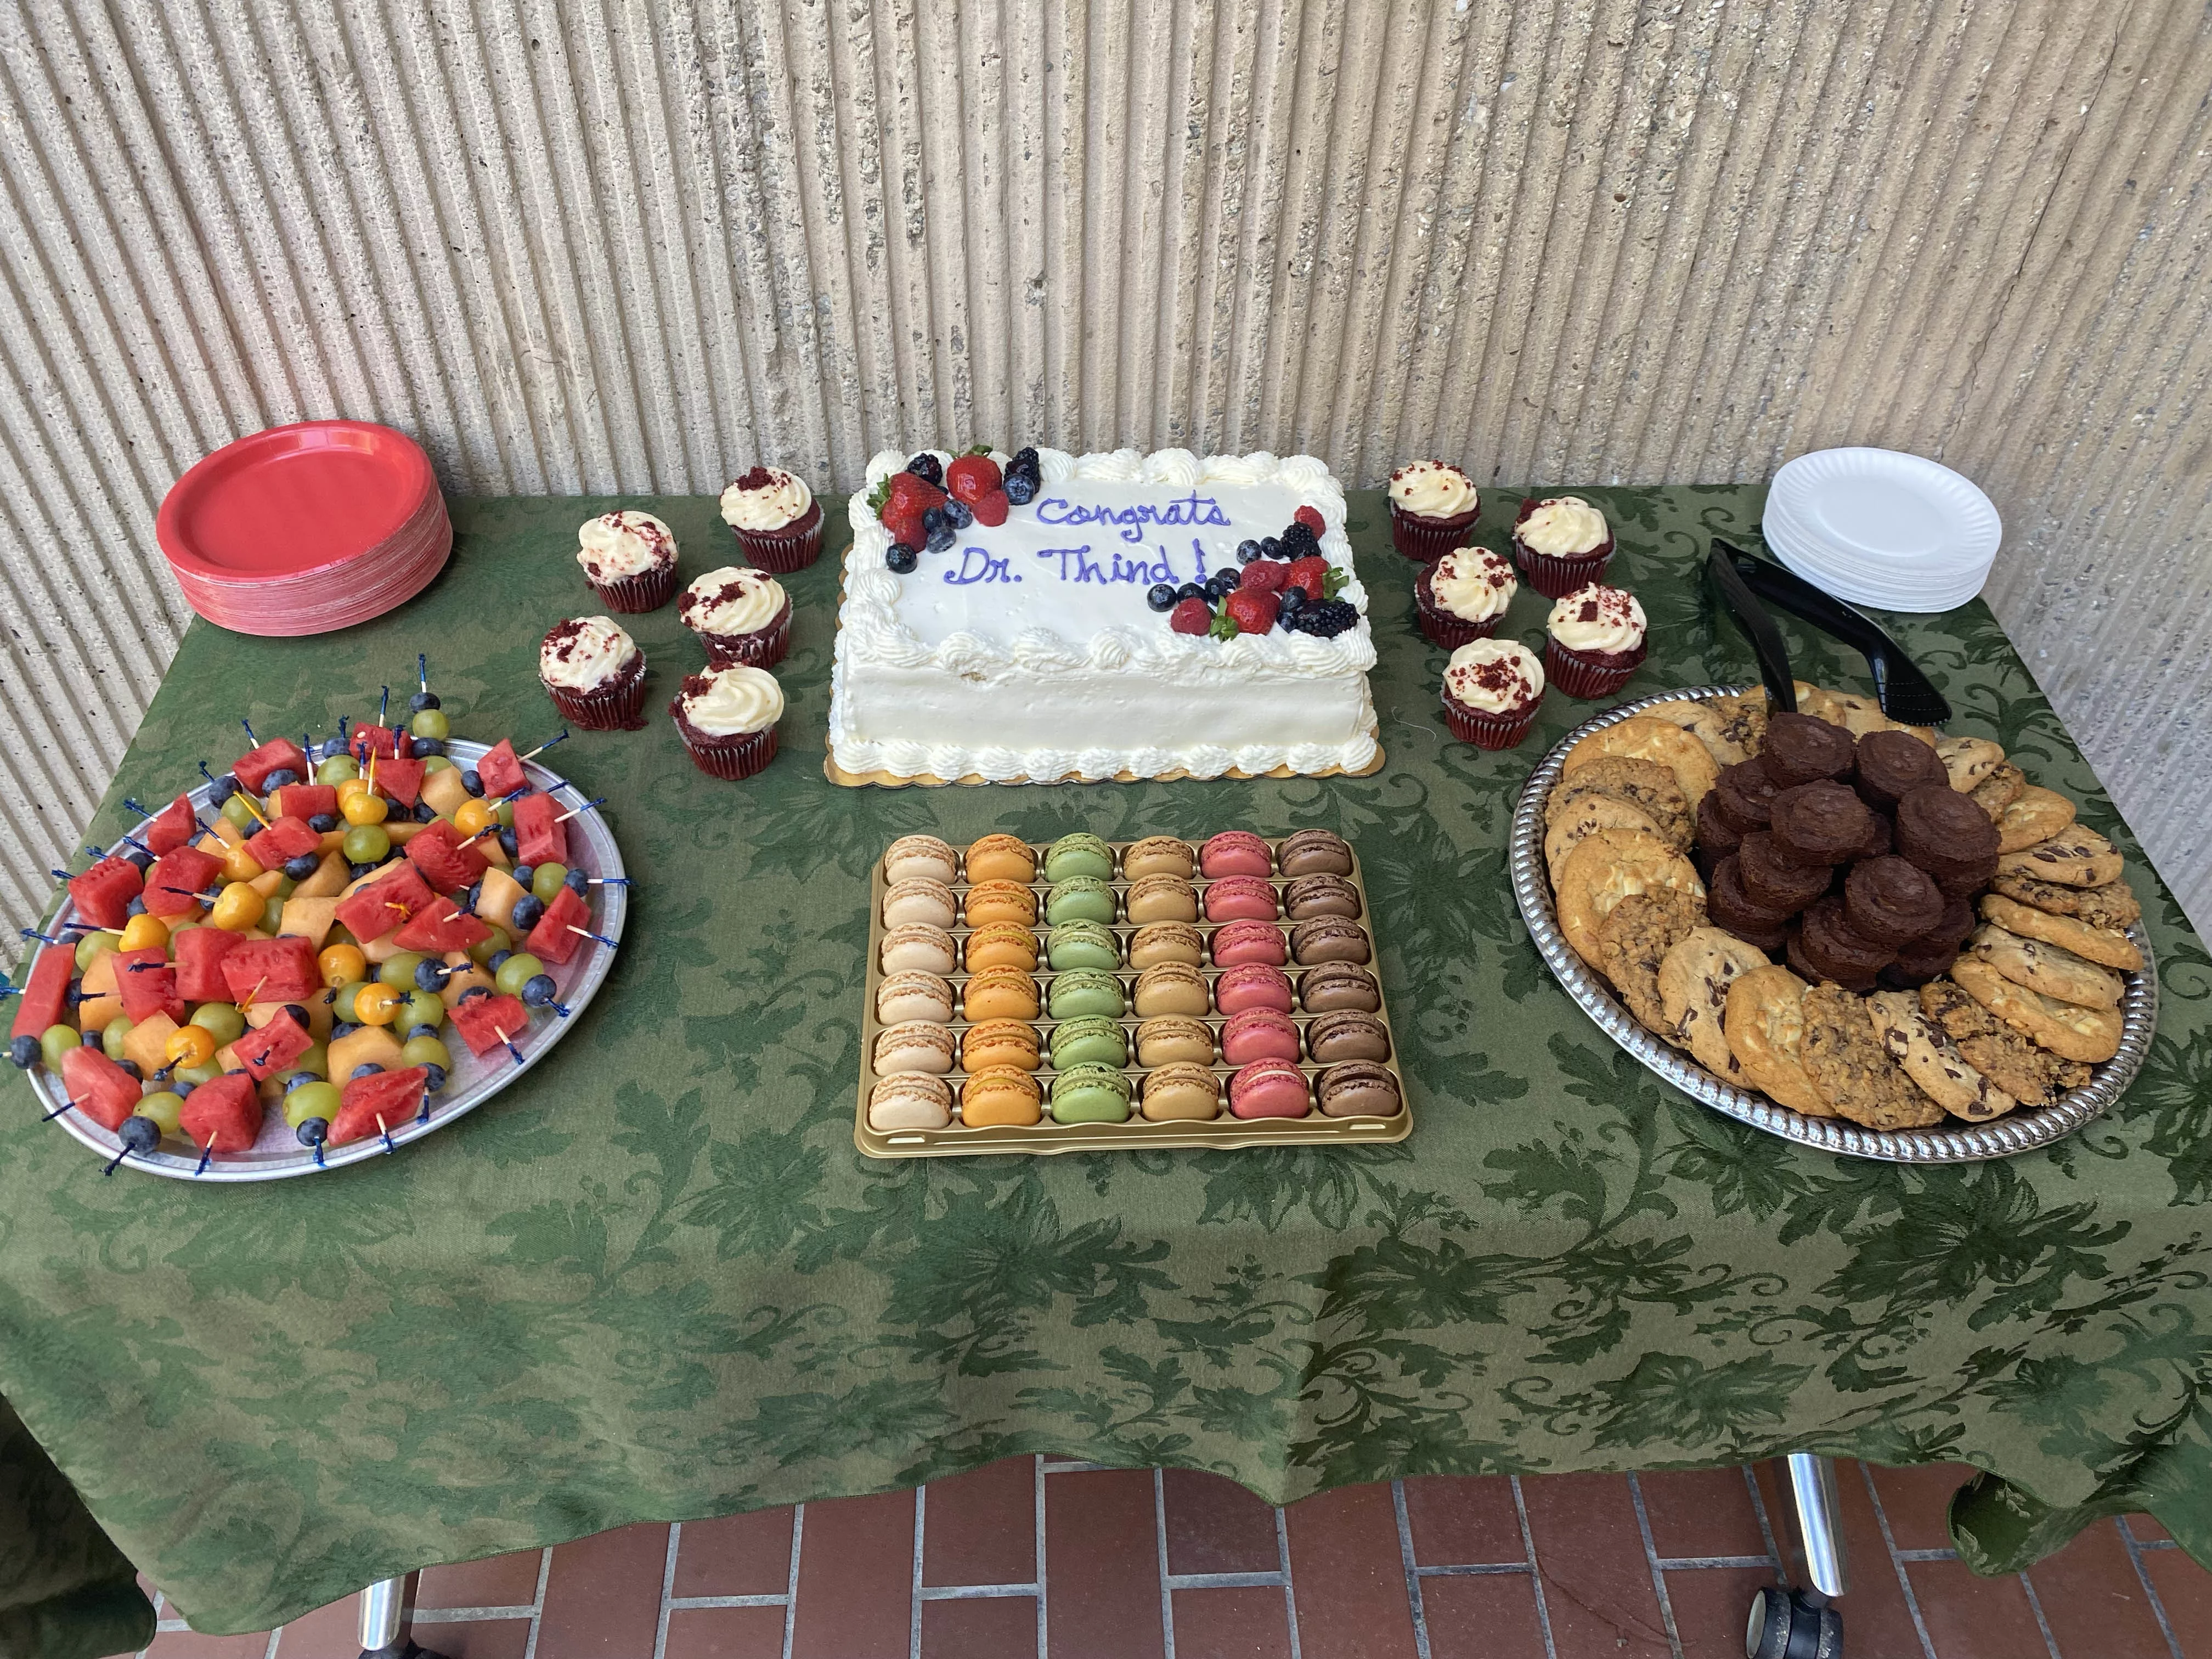 A dessert table with a large cake and other treats. The cake says congrats Dr. Thind on it.